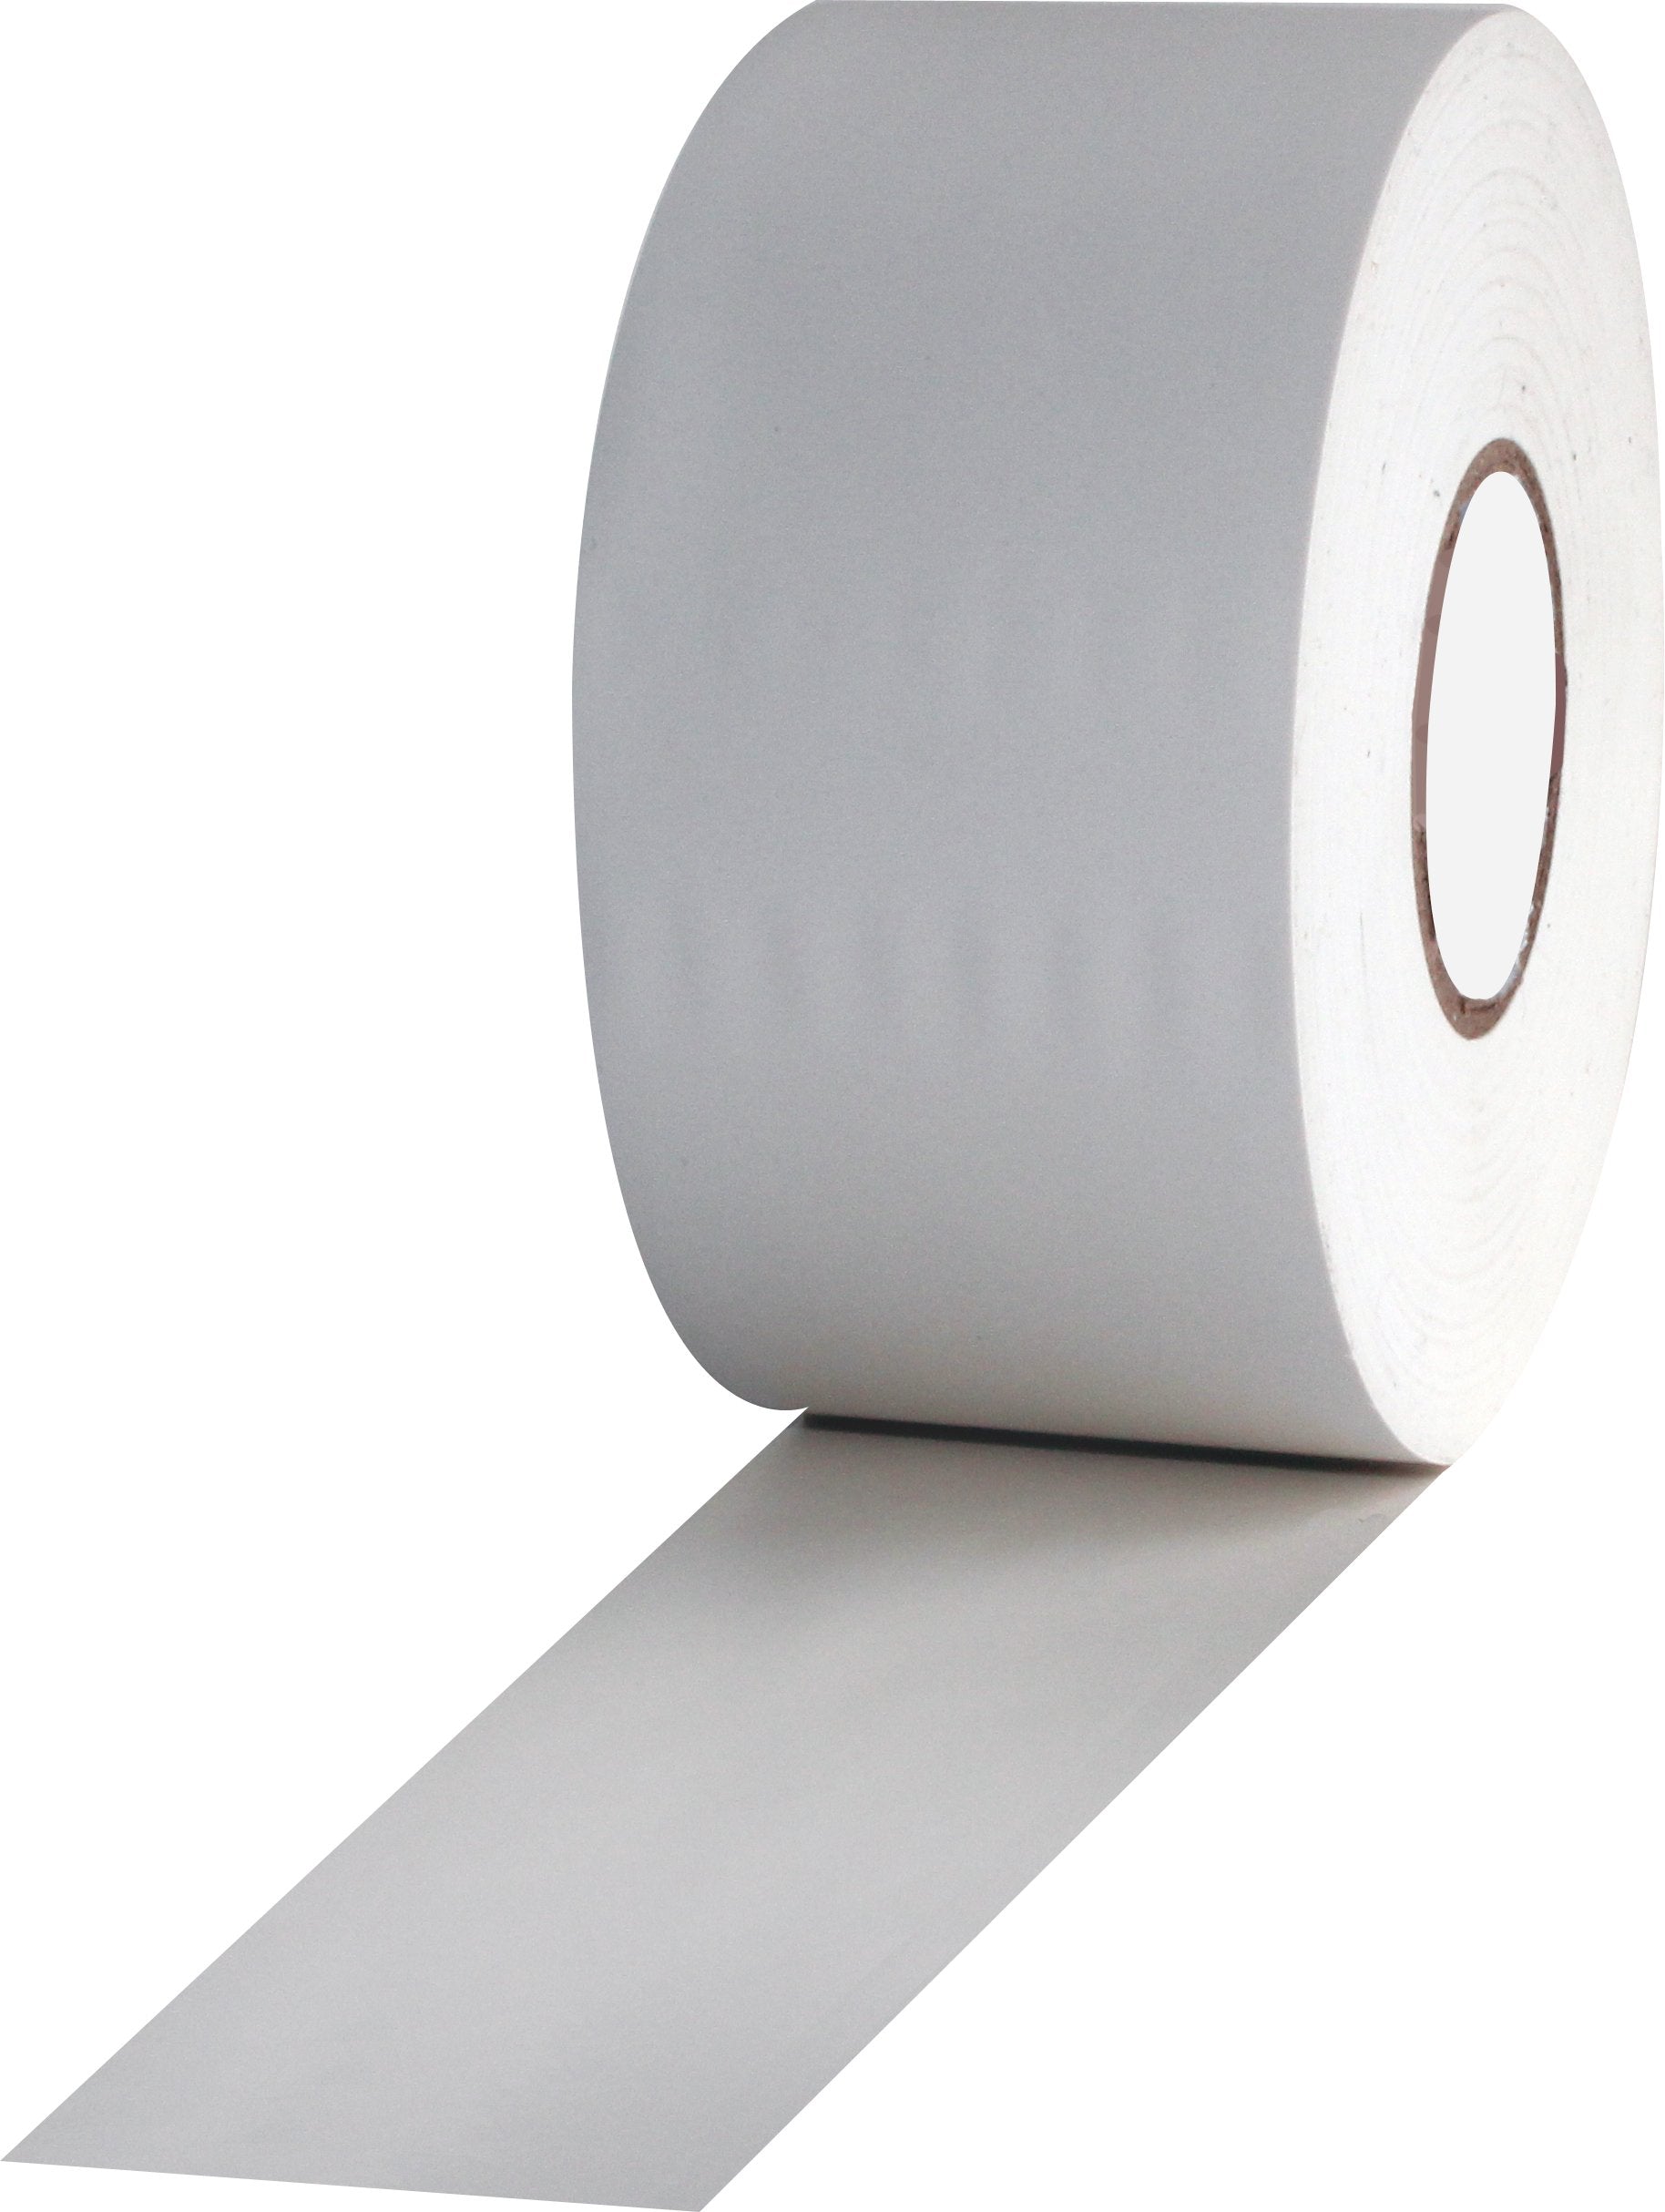 ProTapes Pro 603 Rubber Pipe Wrap Tape with PVC Backing, 10 mil Thick, 100'  Length x 2 Width, White (Pack of 1) 2 Width (1 pack)